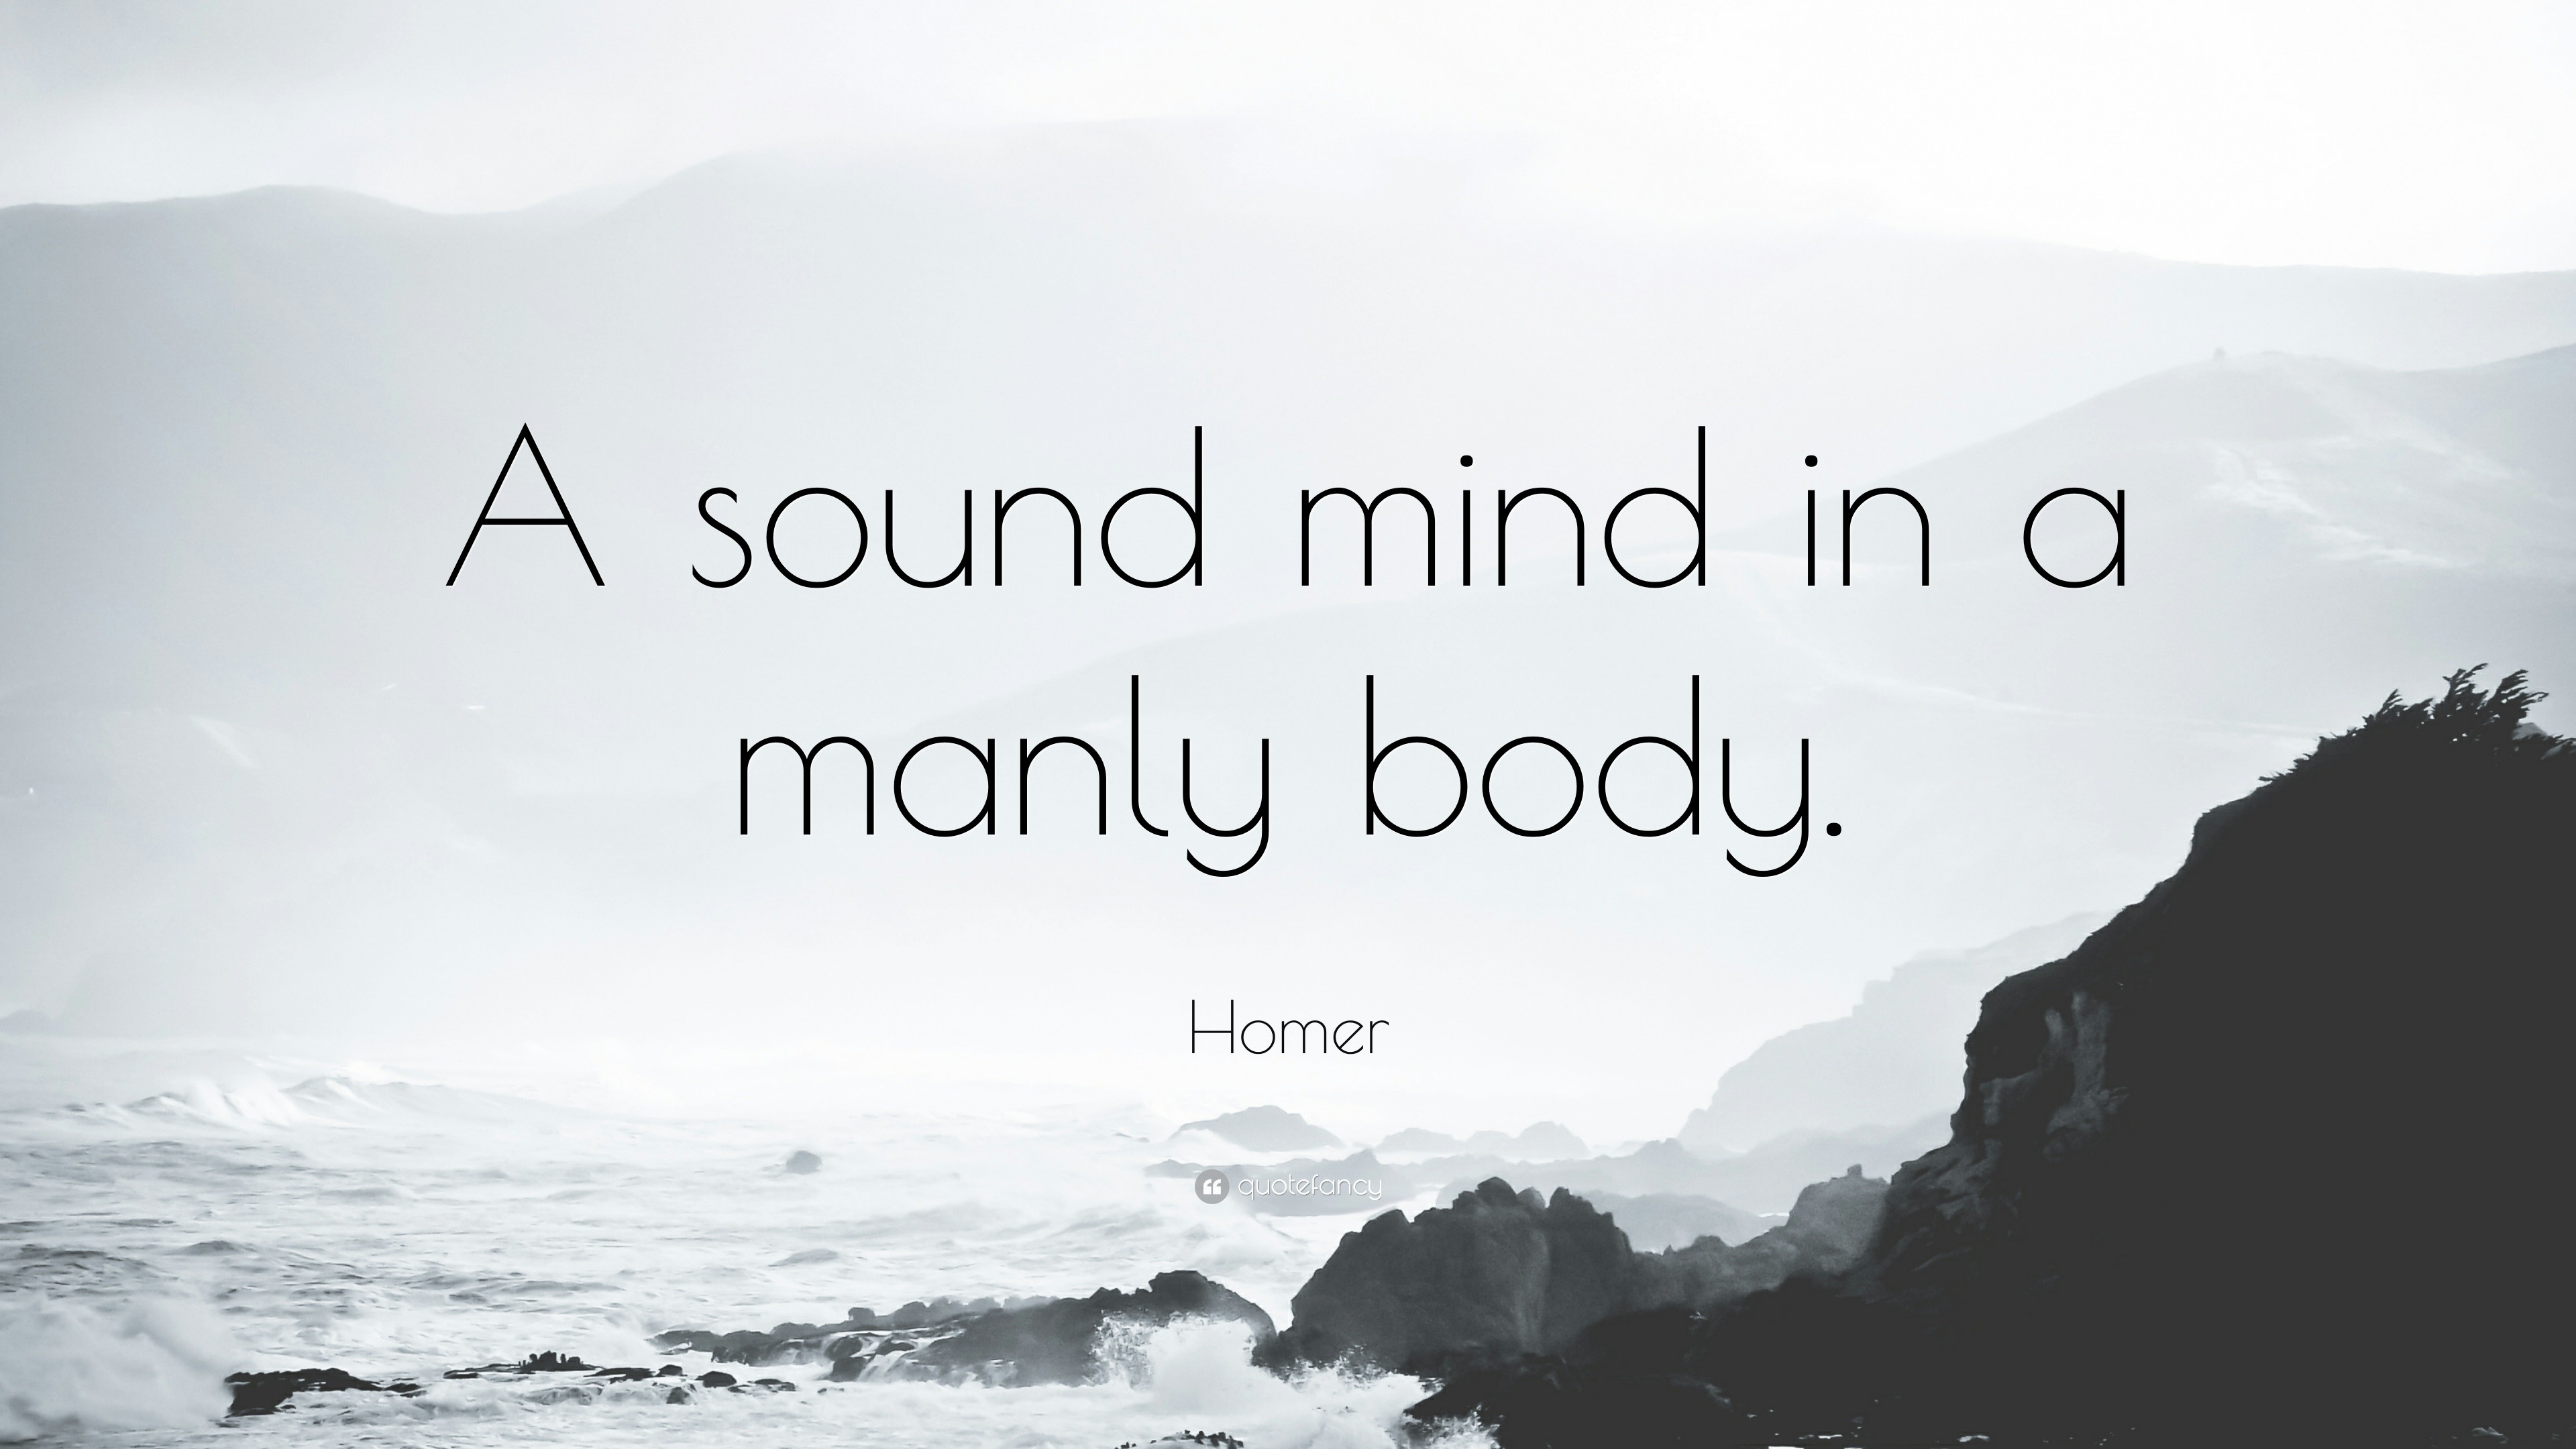 Homer Quote: “A sound mind in a manly